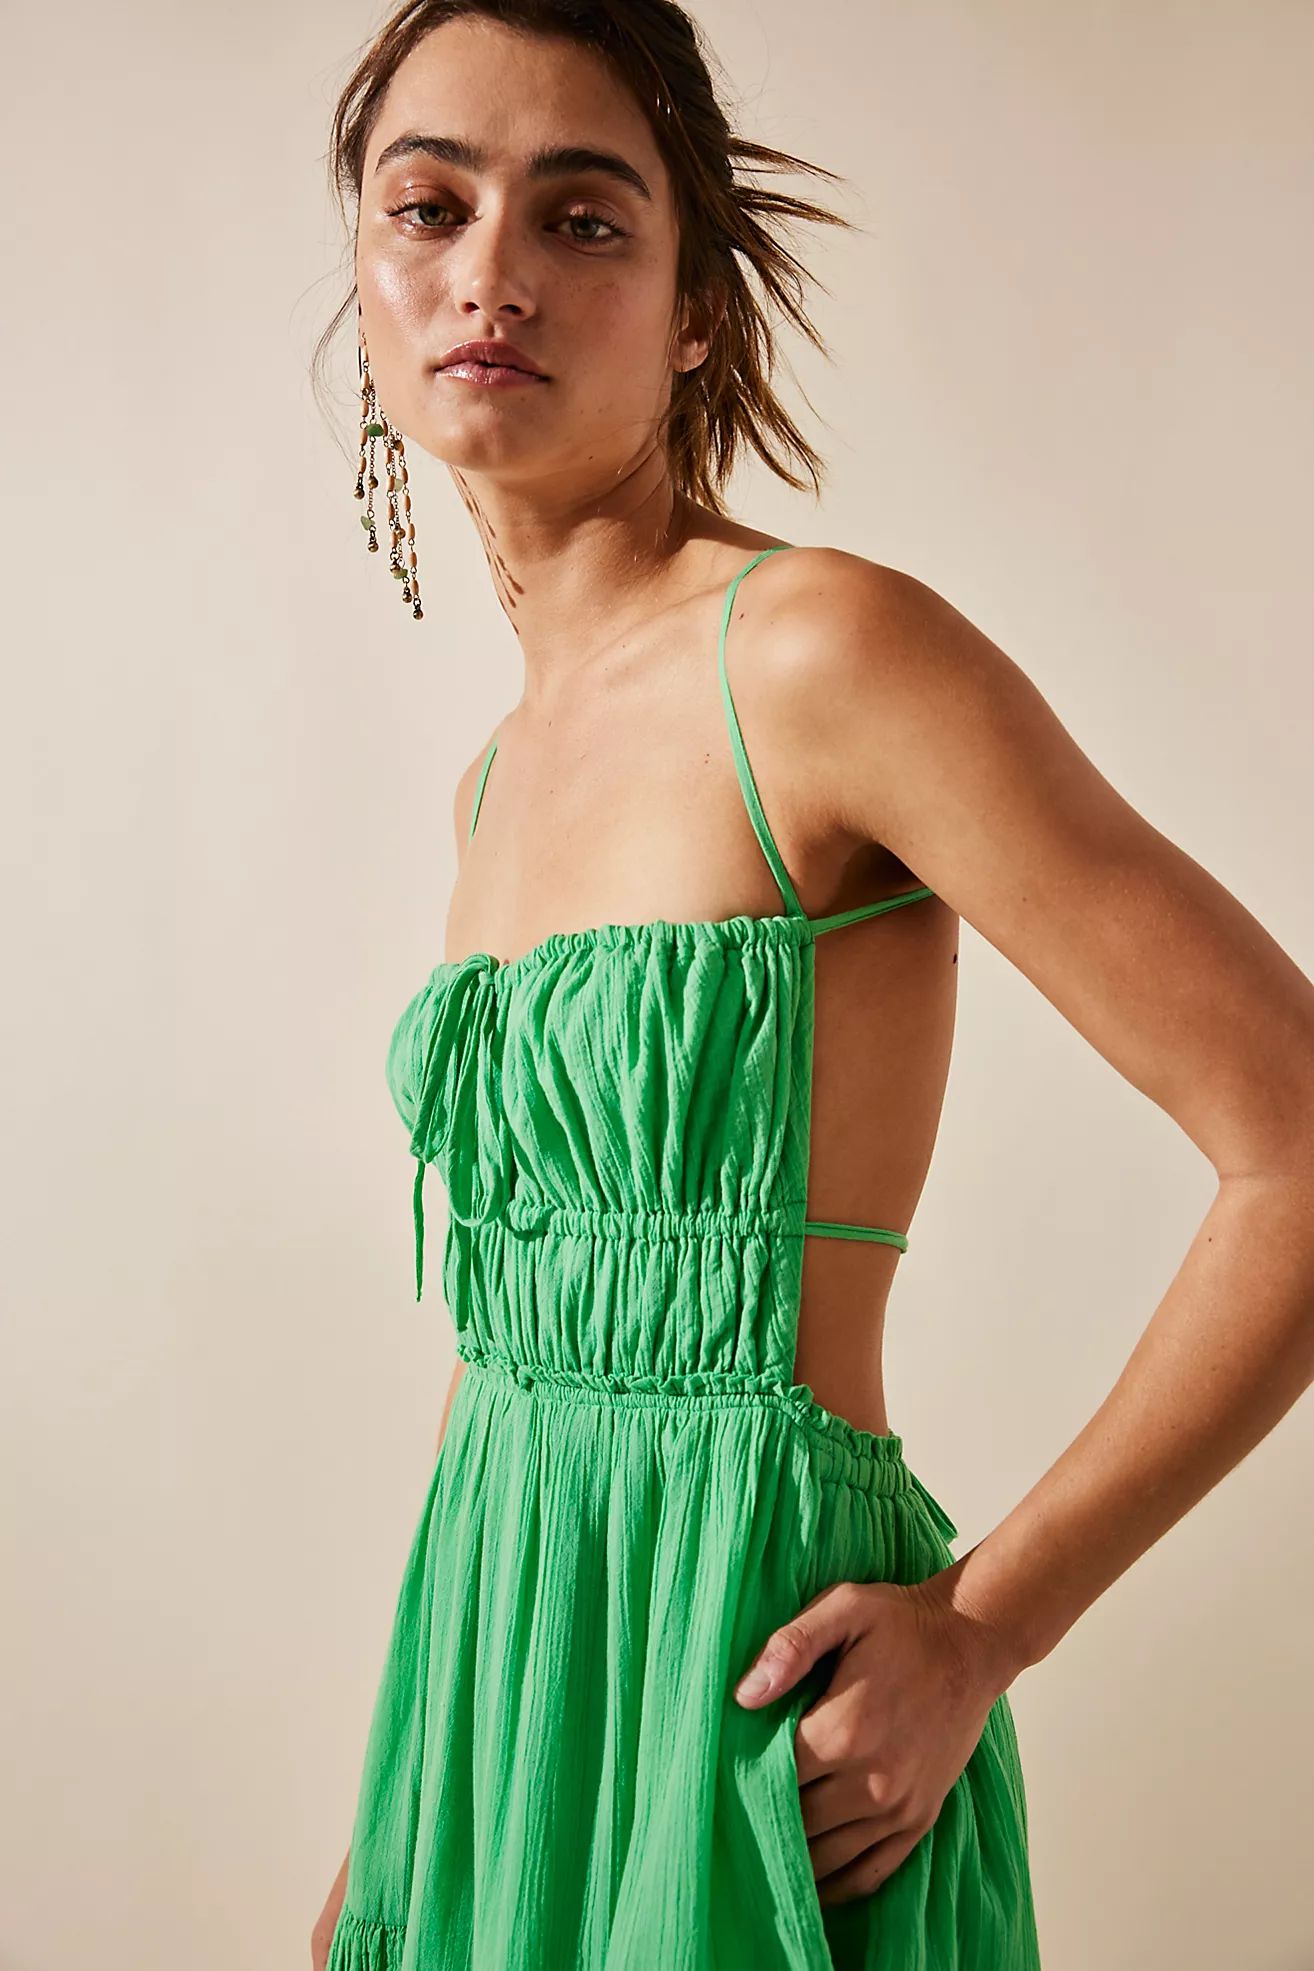 Similar Items

               
            Brentwood Maxi
            
                Quickshop
... | Free People (Global - UK&FR Excluded)